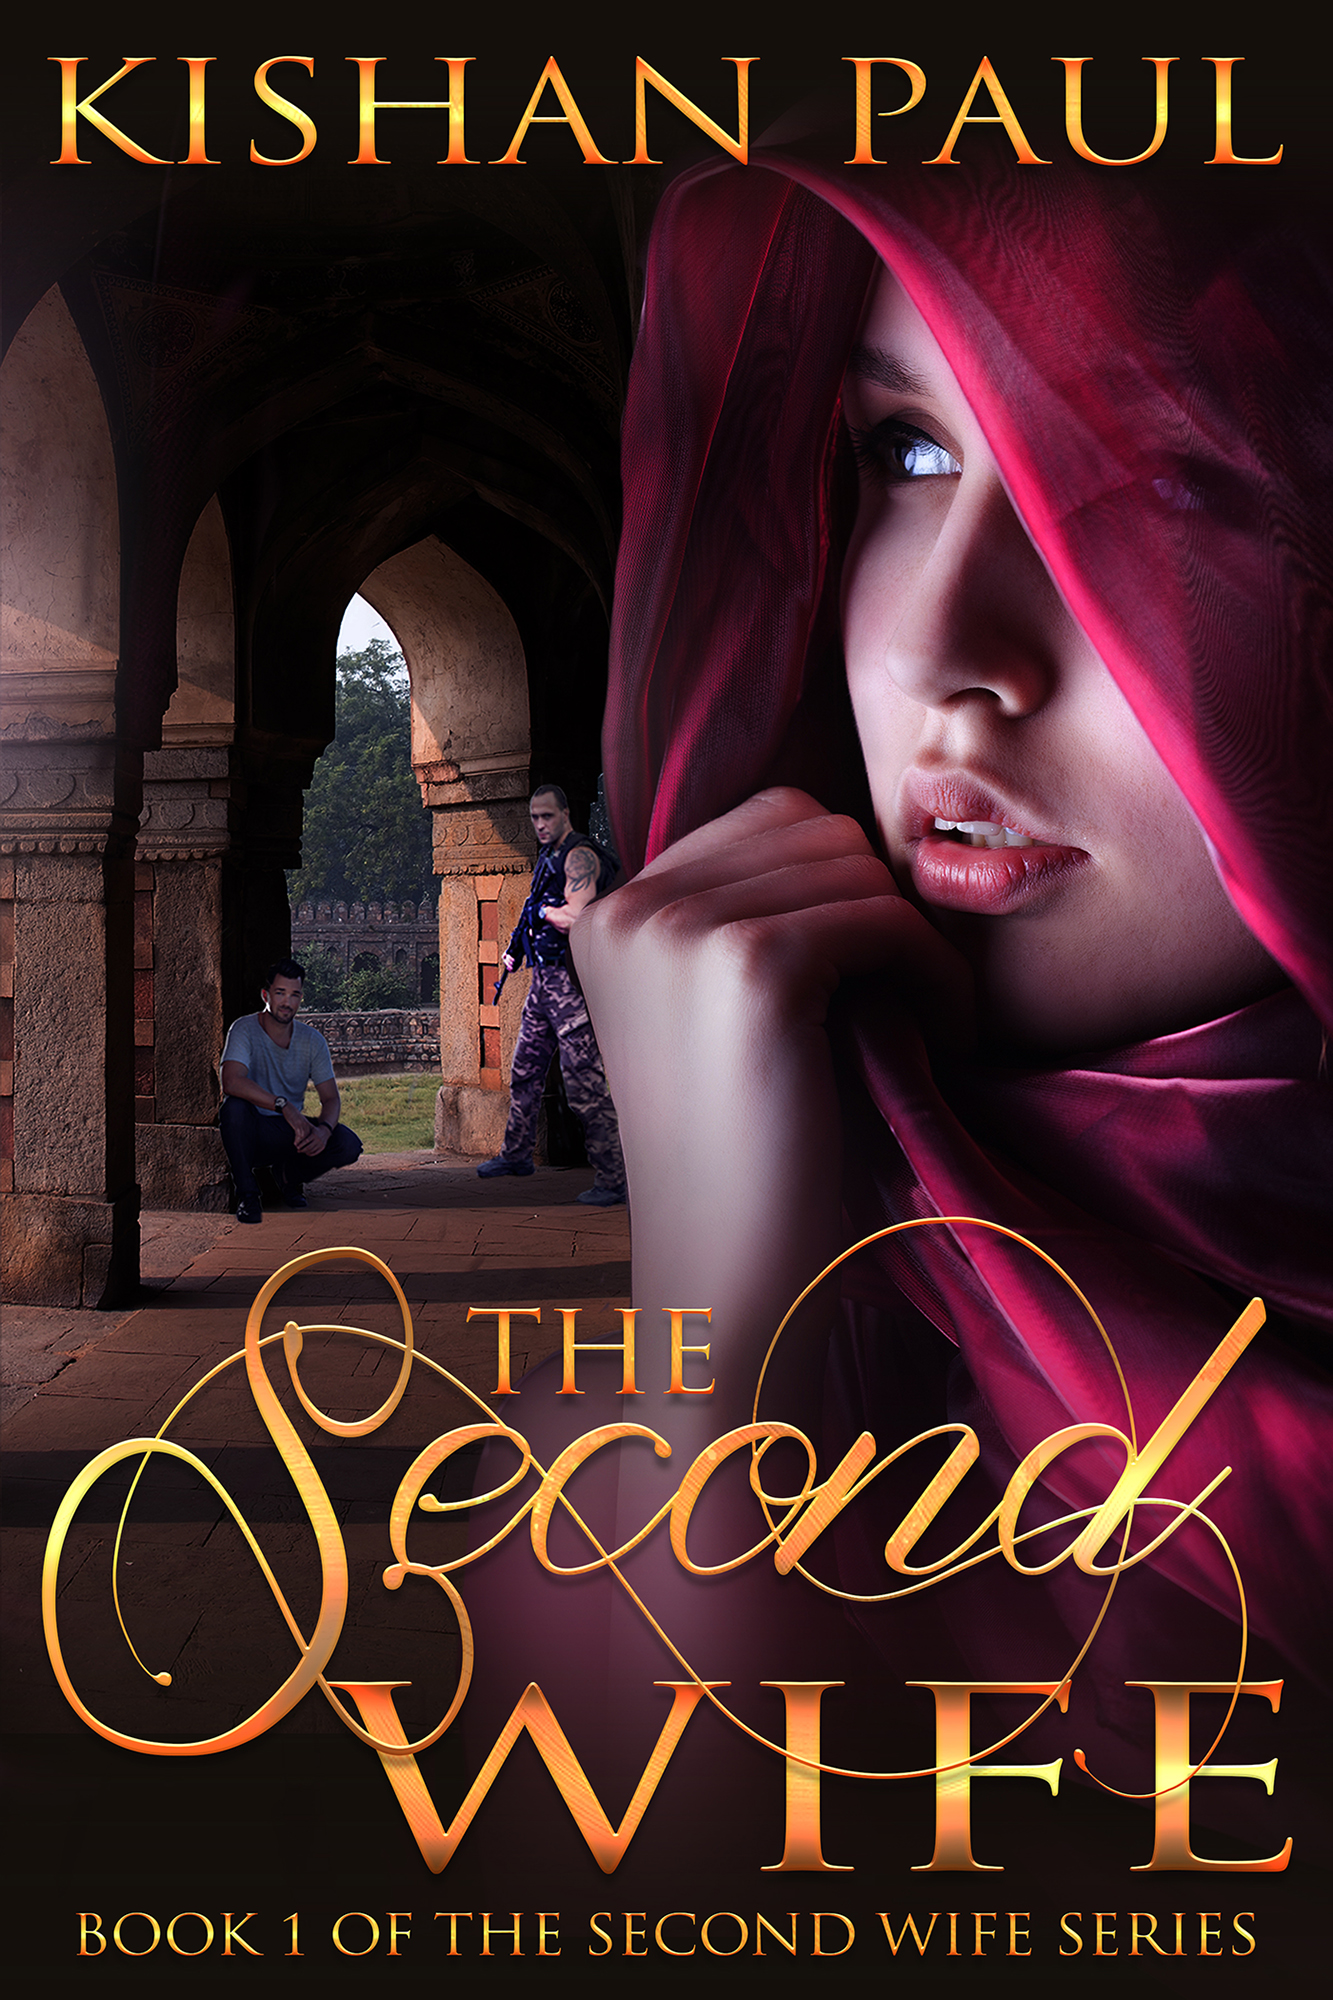 FREE: The Second Wife by Kishan Paul